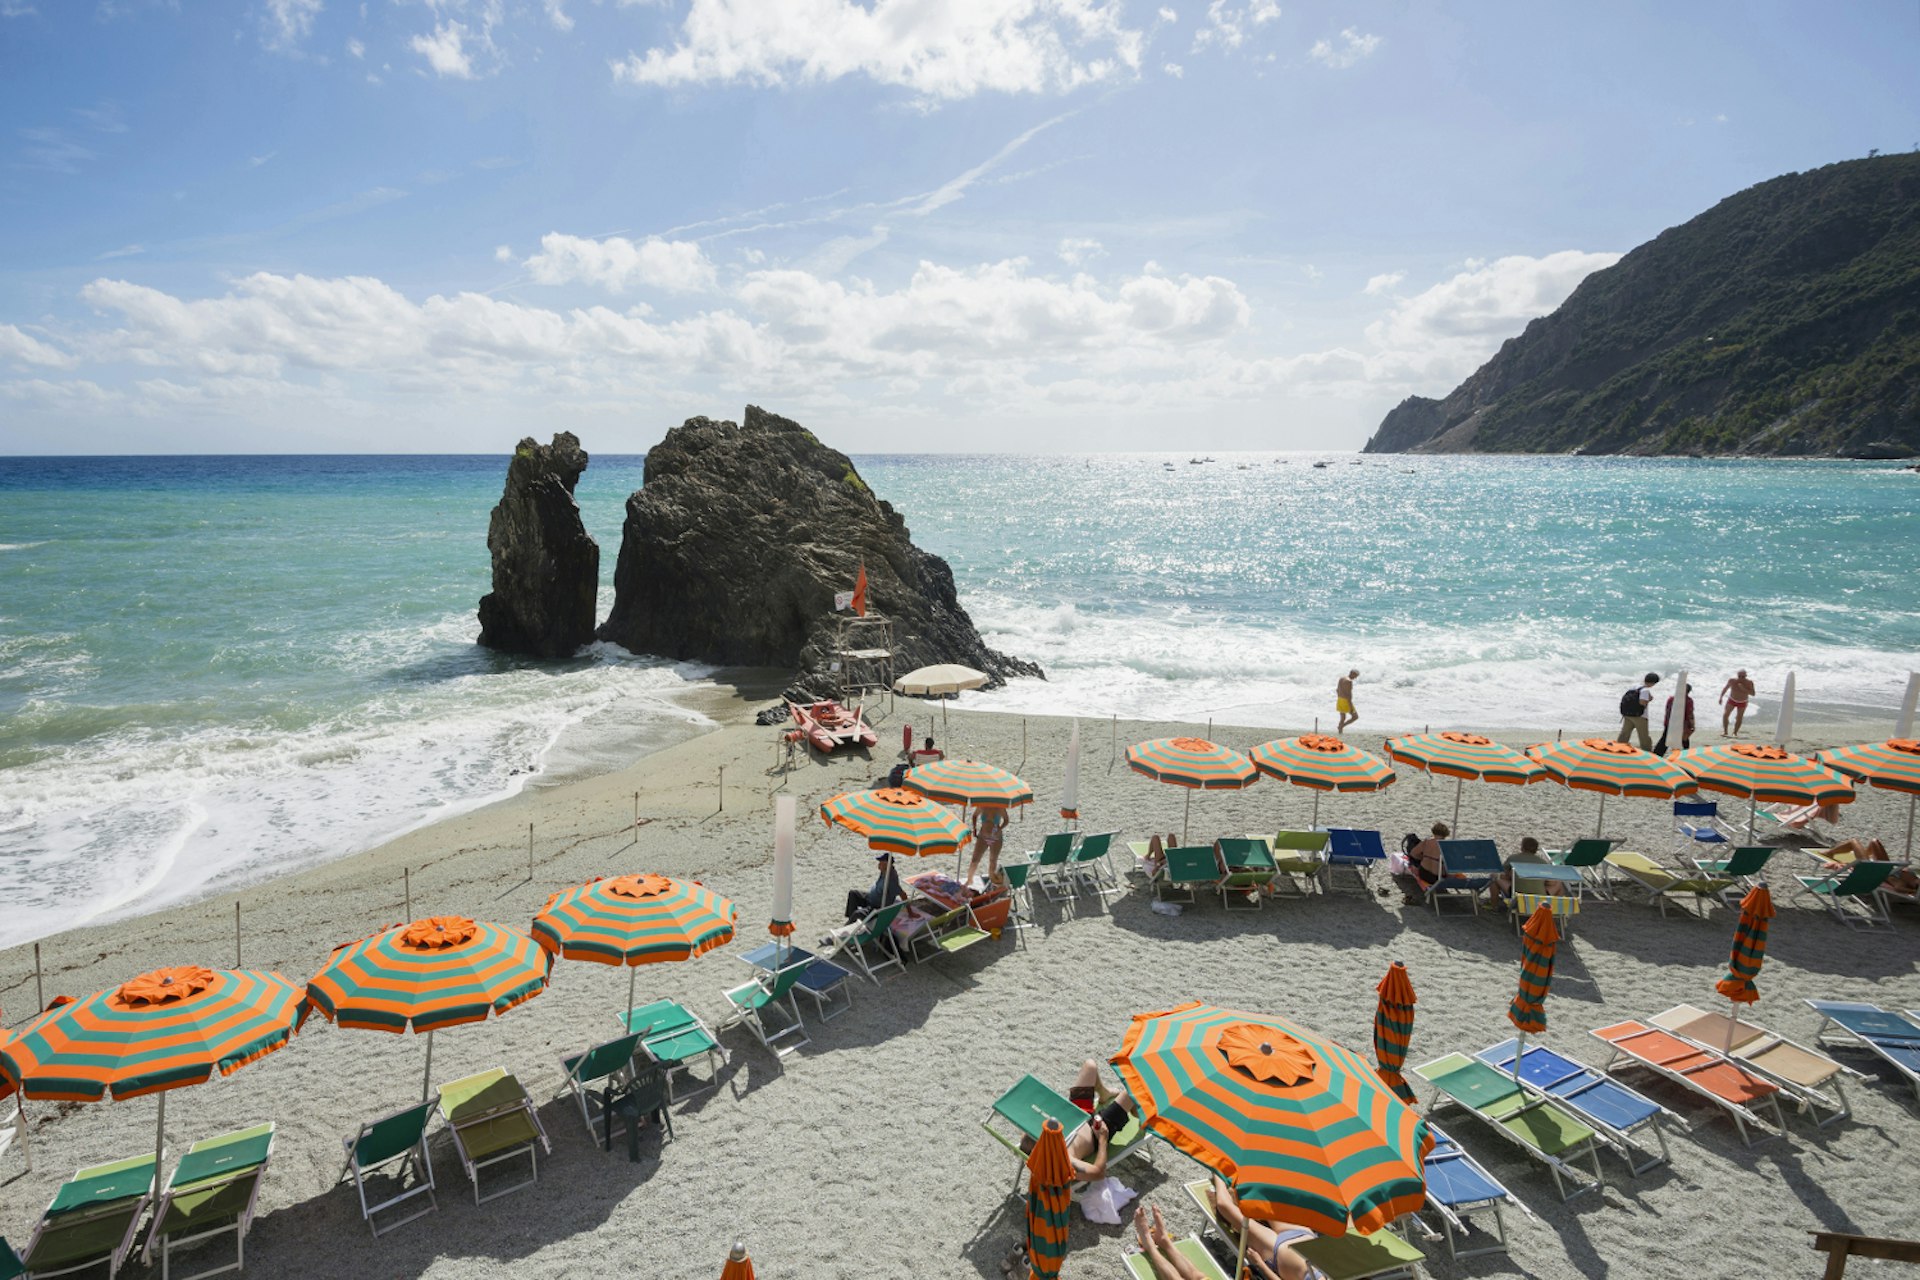 The sandy beach at Monterosso, Cinque Terre, lined with pink and green striped umbrellas and beach loungers